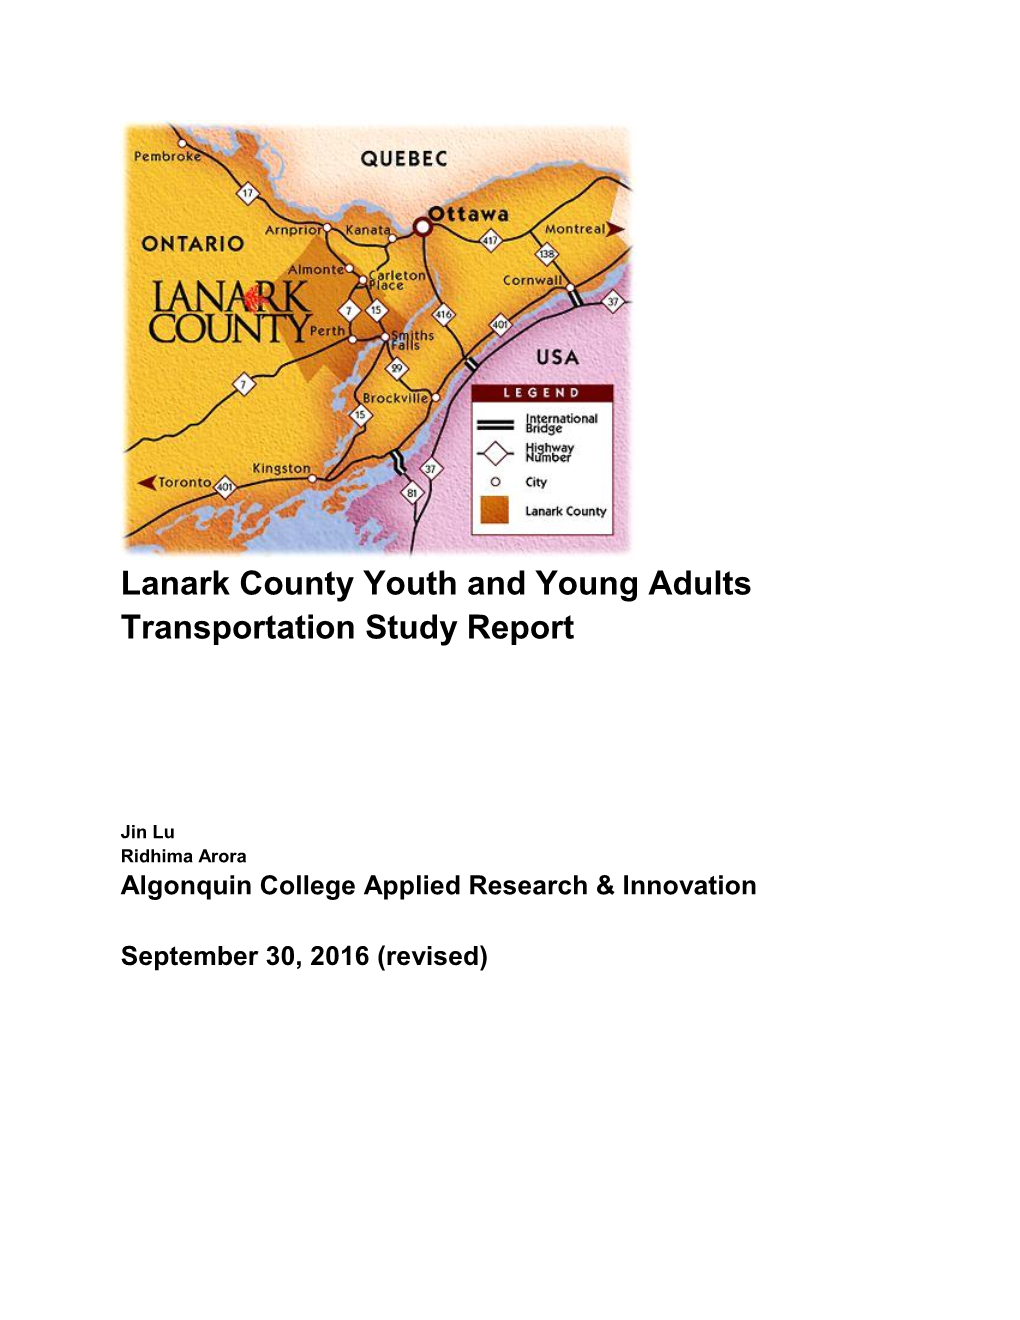 Lanark County Youth and Young Adults Transportation Study Report